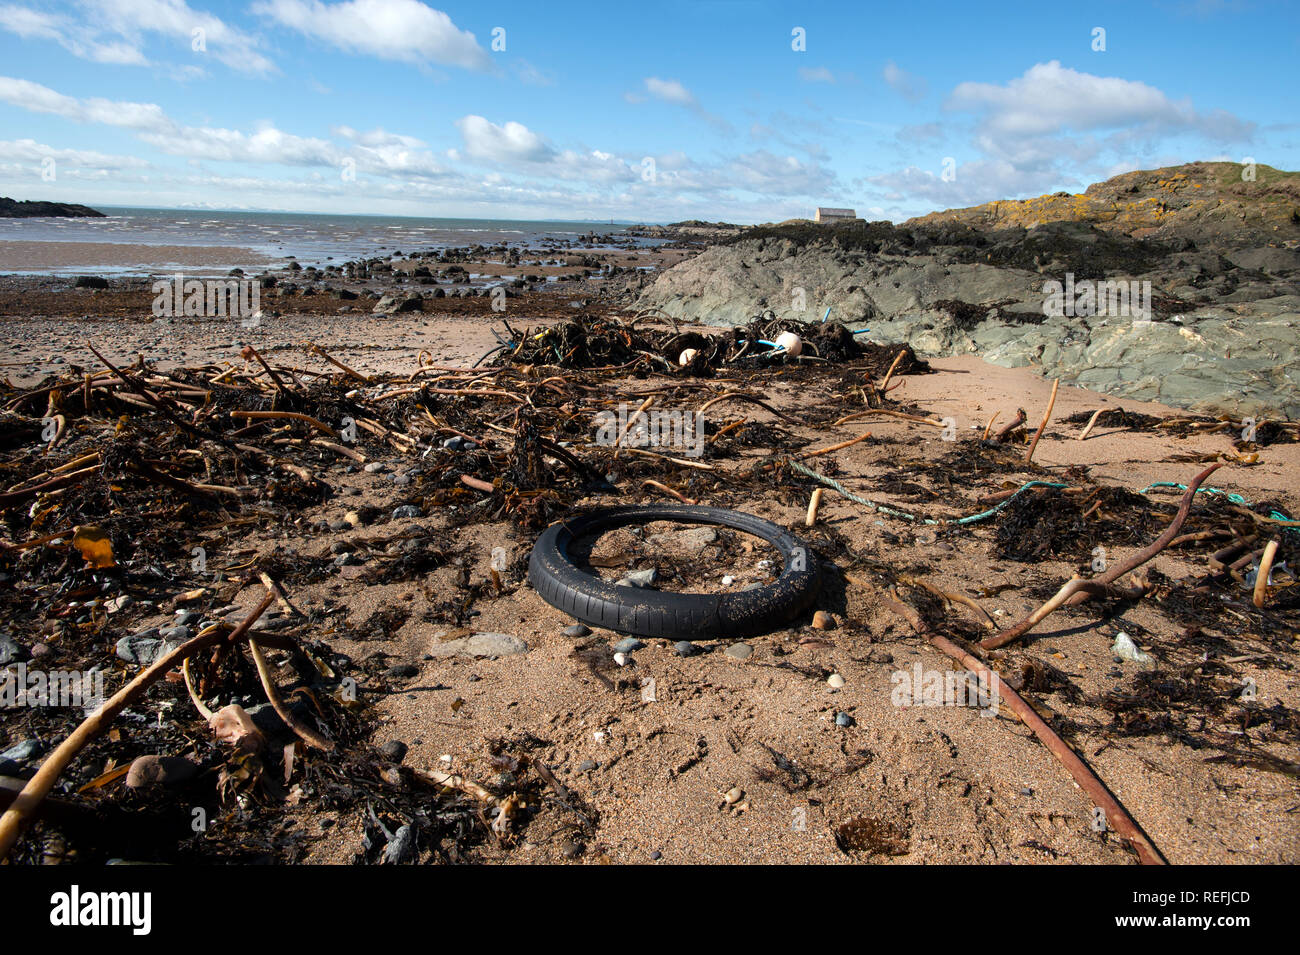 Beach debris rubber tyres and ropes washed up on a beach in Elie Fife Scotland Stock Photo